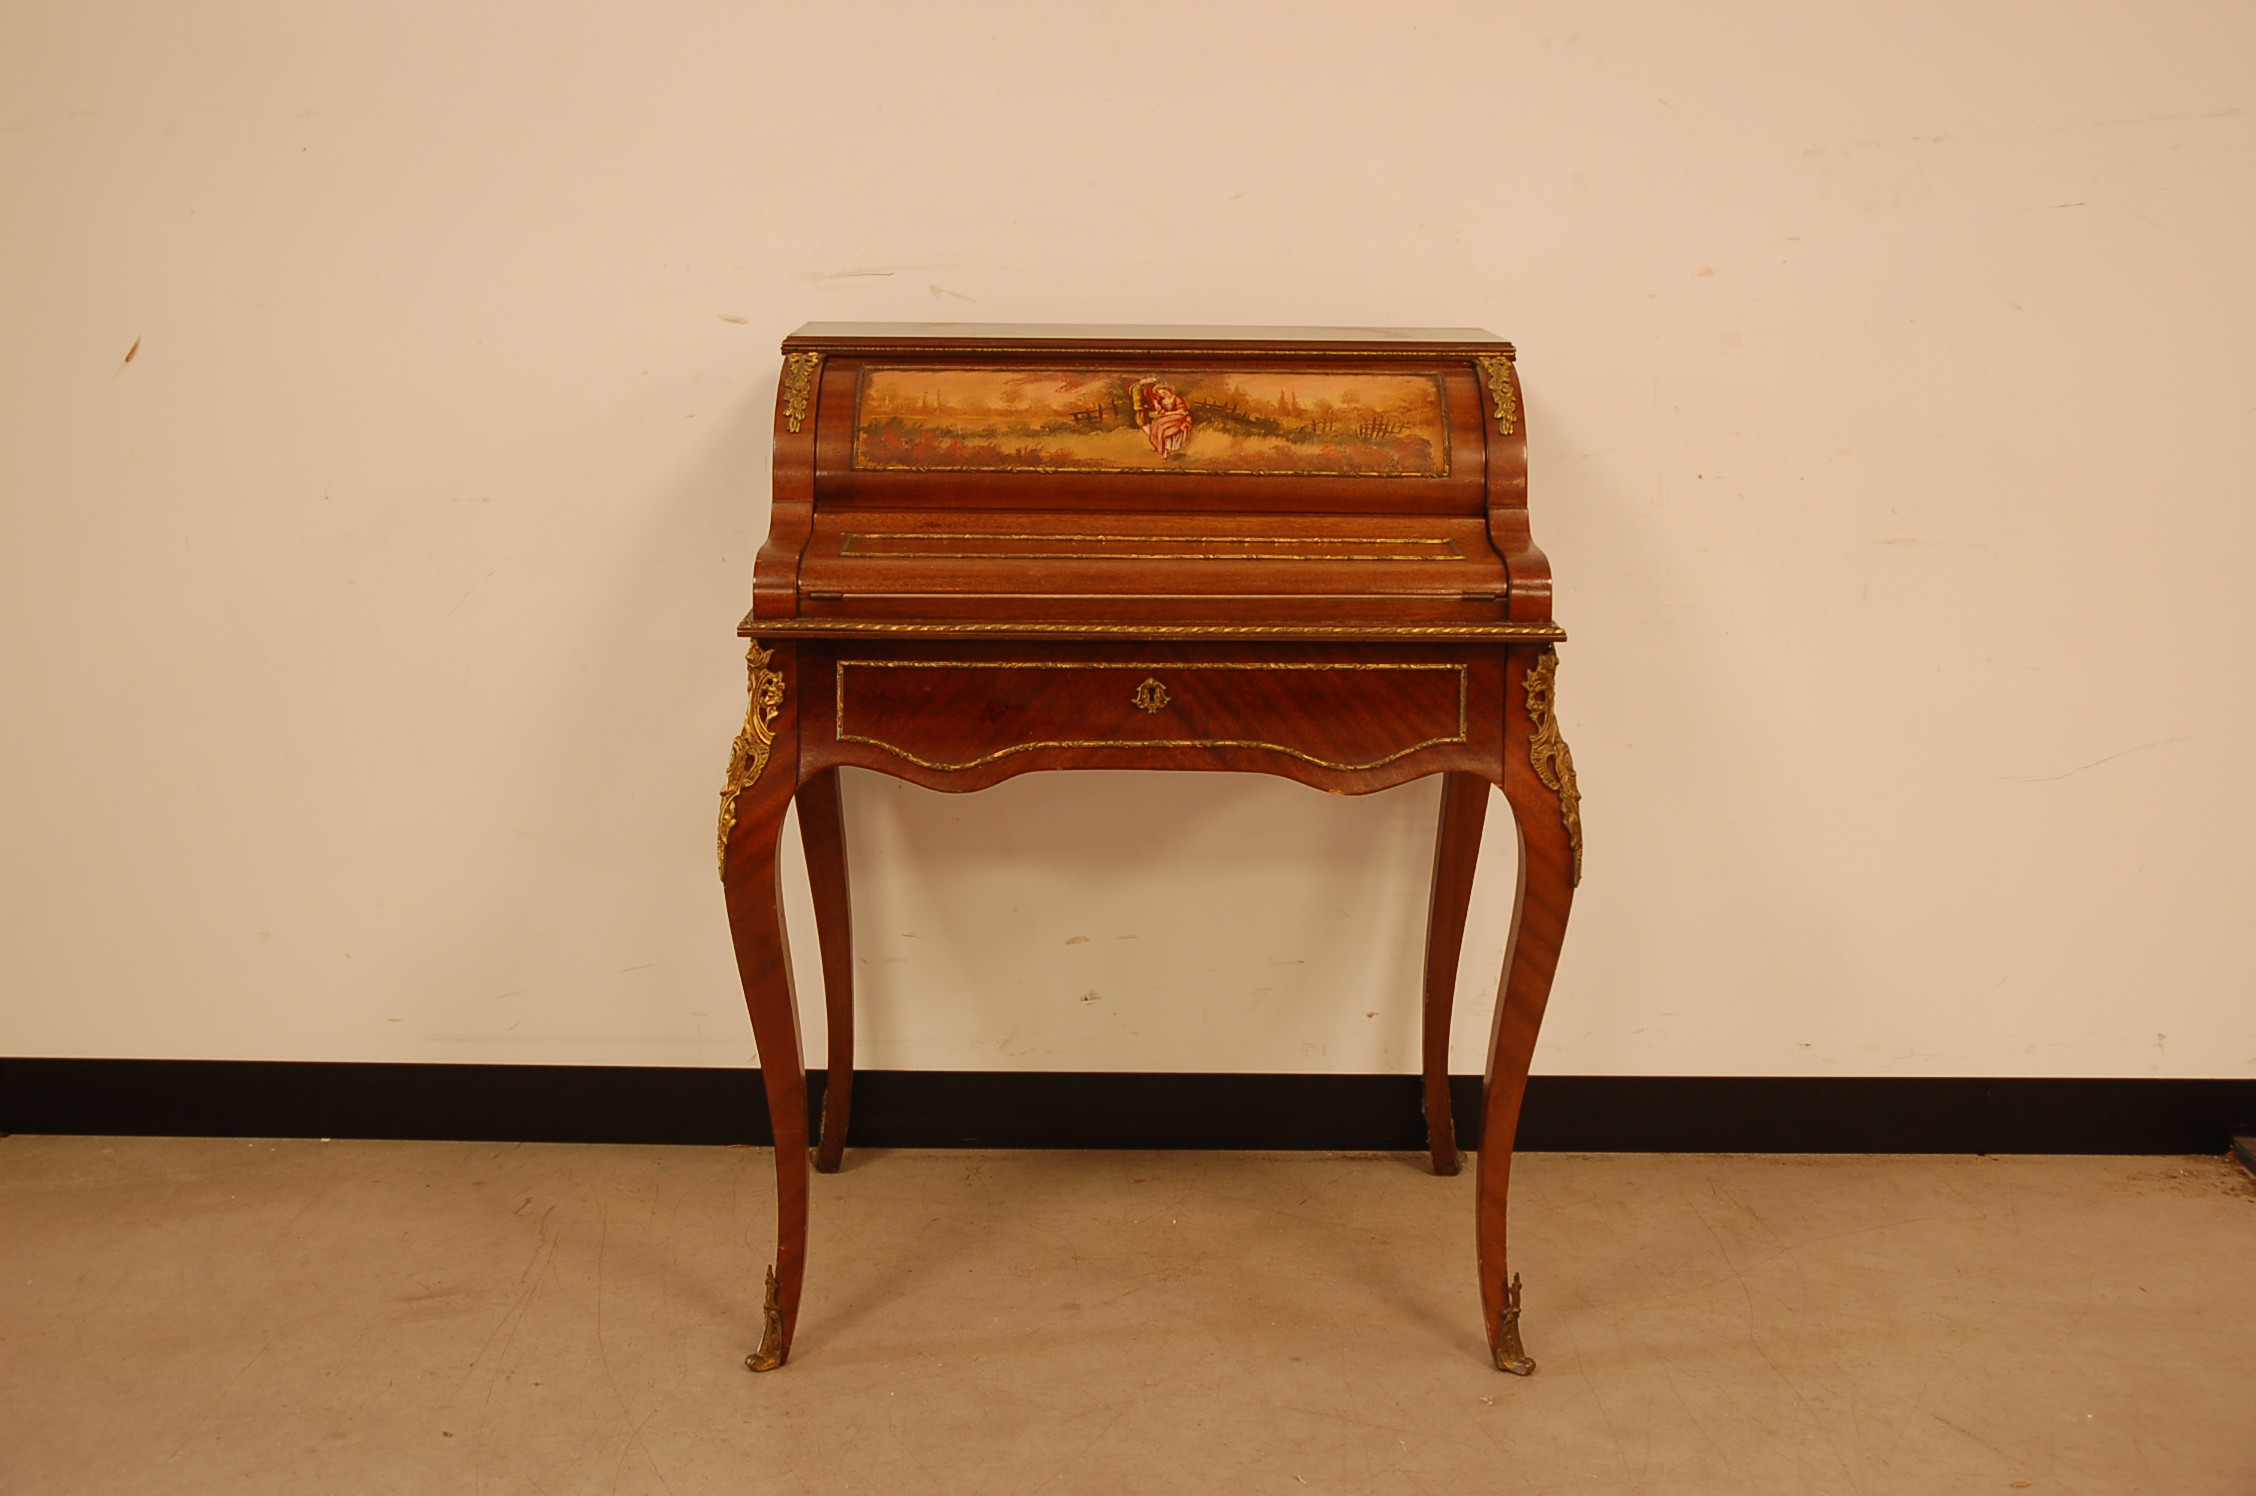 A mid 20th century mahogany lady's writing desk, the Louis XVI style small desk with drawer